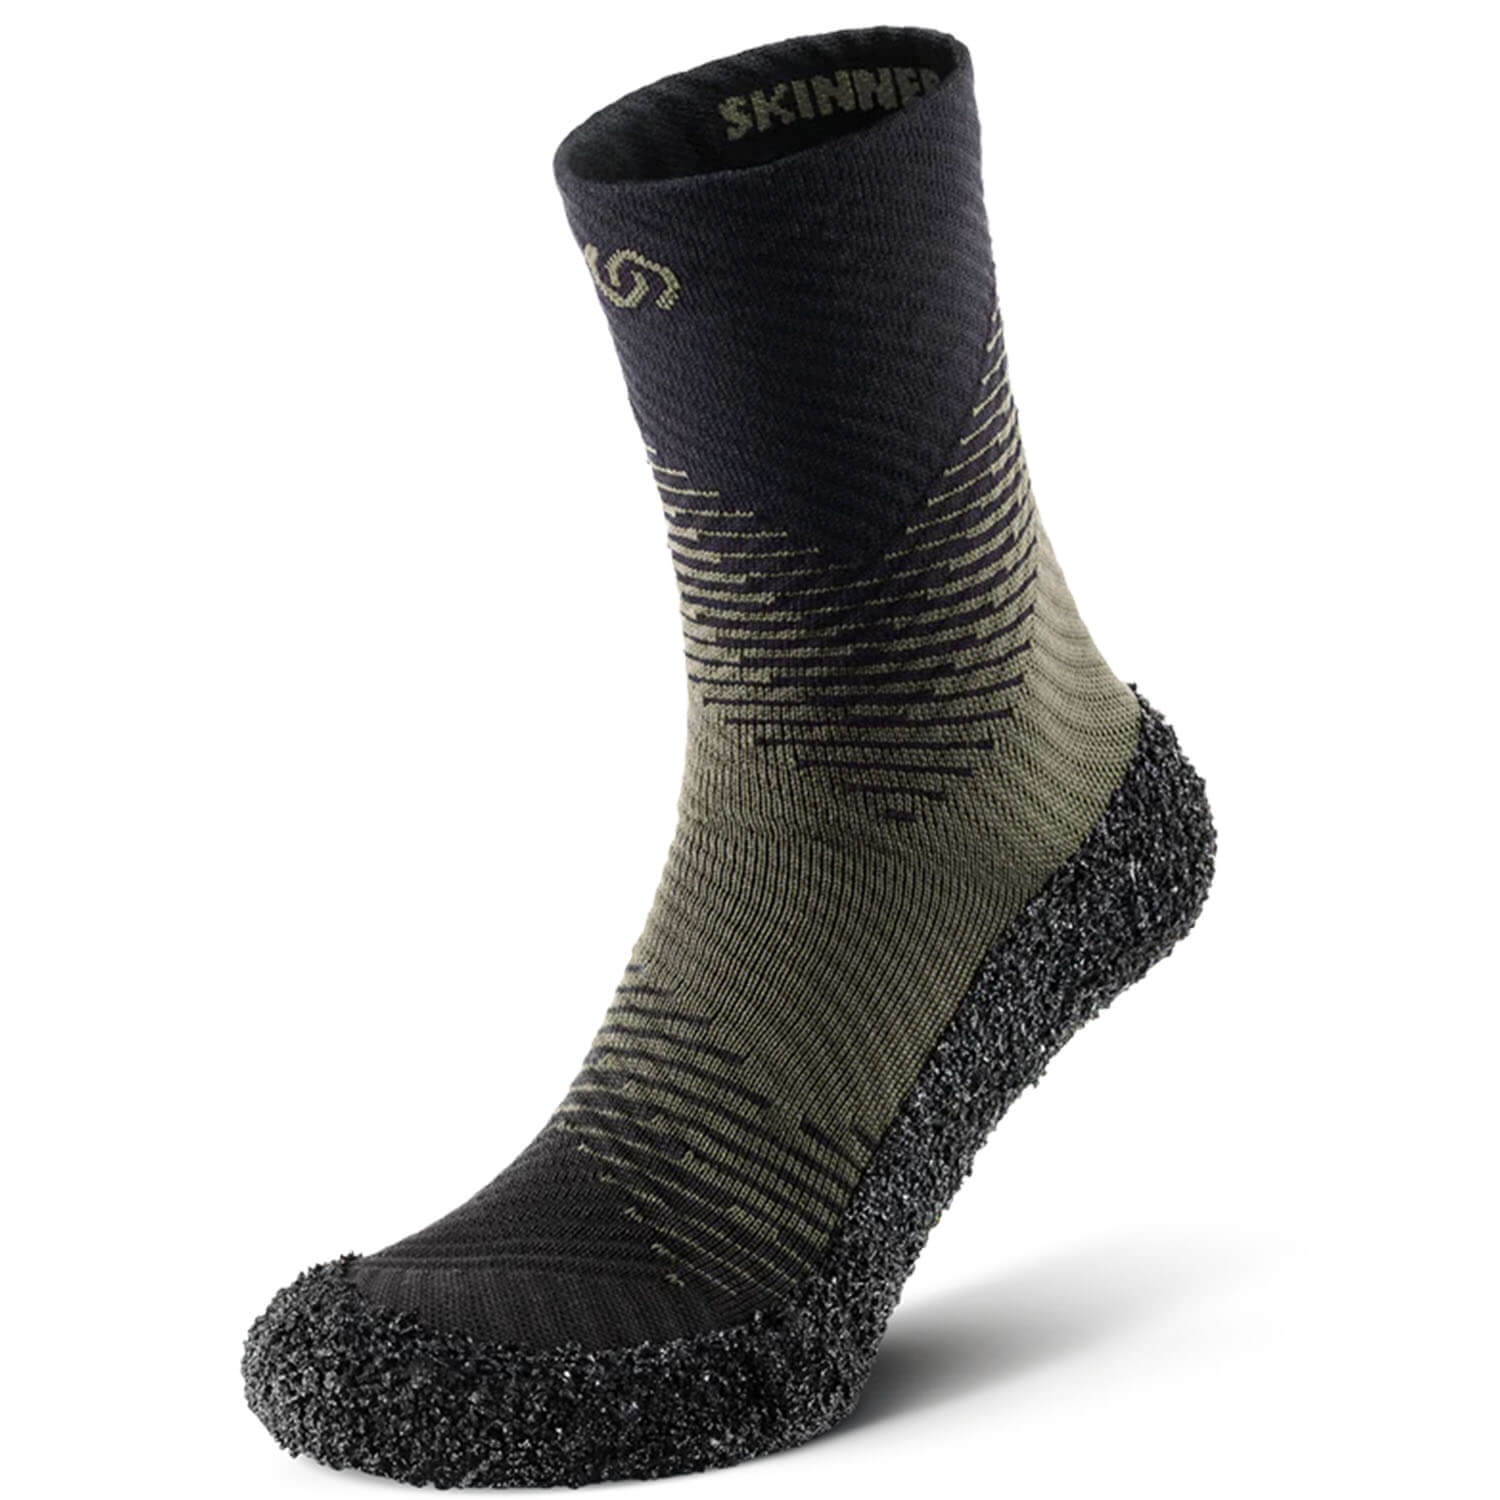 Skinners stalking socks Compression 2.0 (pine) - Gifts For Hunters